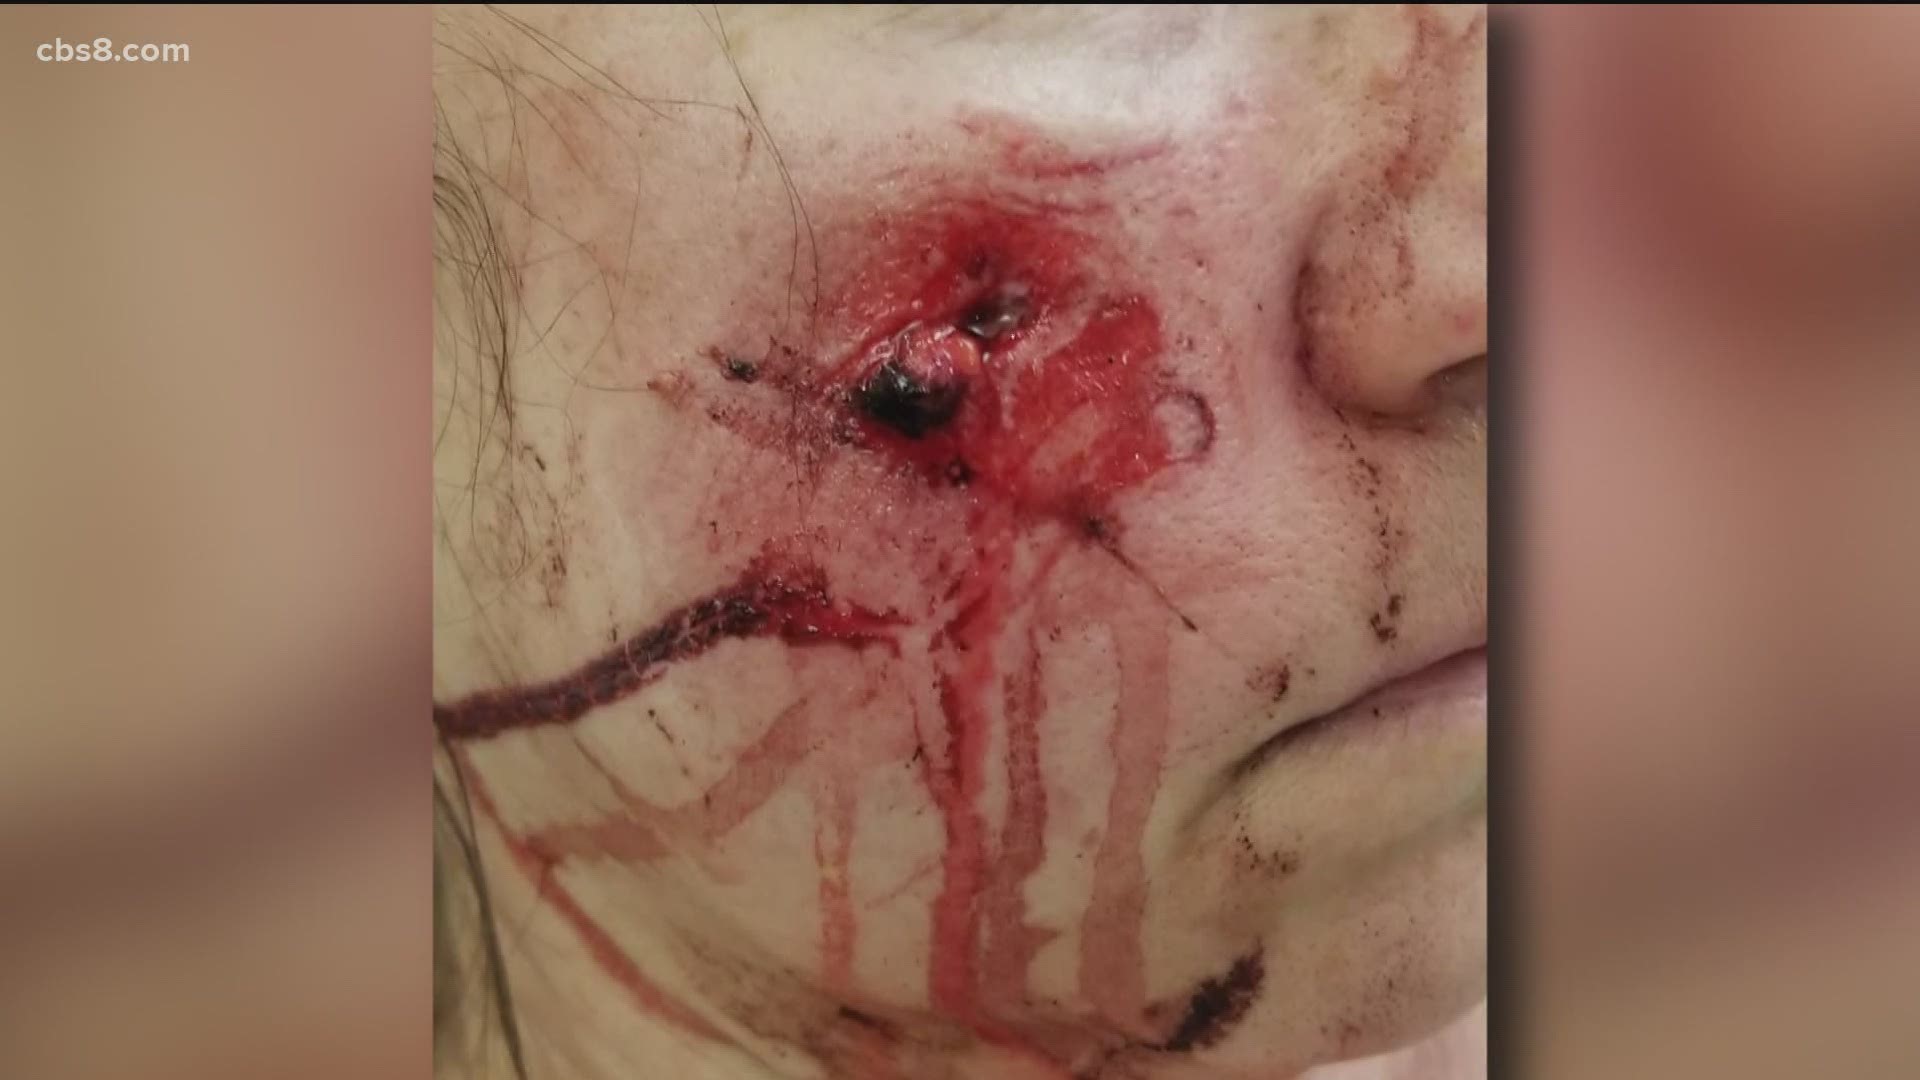 David Gotfredson reports a second woman has come forward saying she was shot in teh face with a police projectile at Saturday's protest in La Mesa.